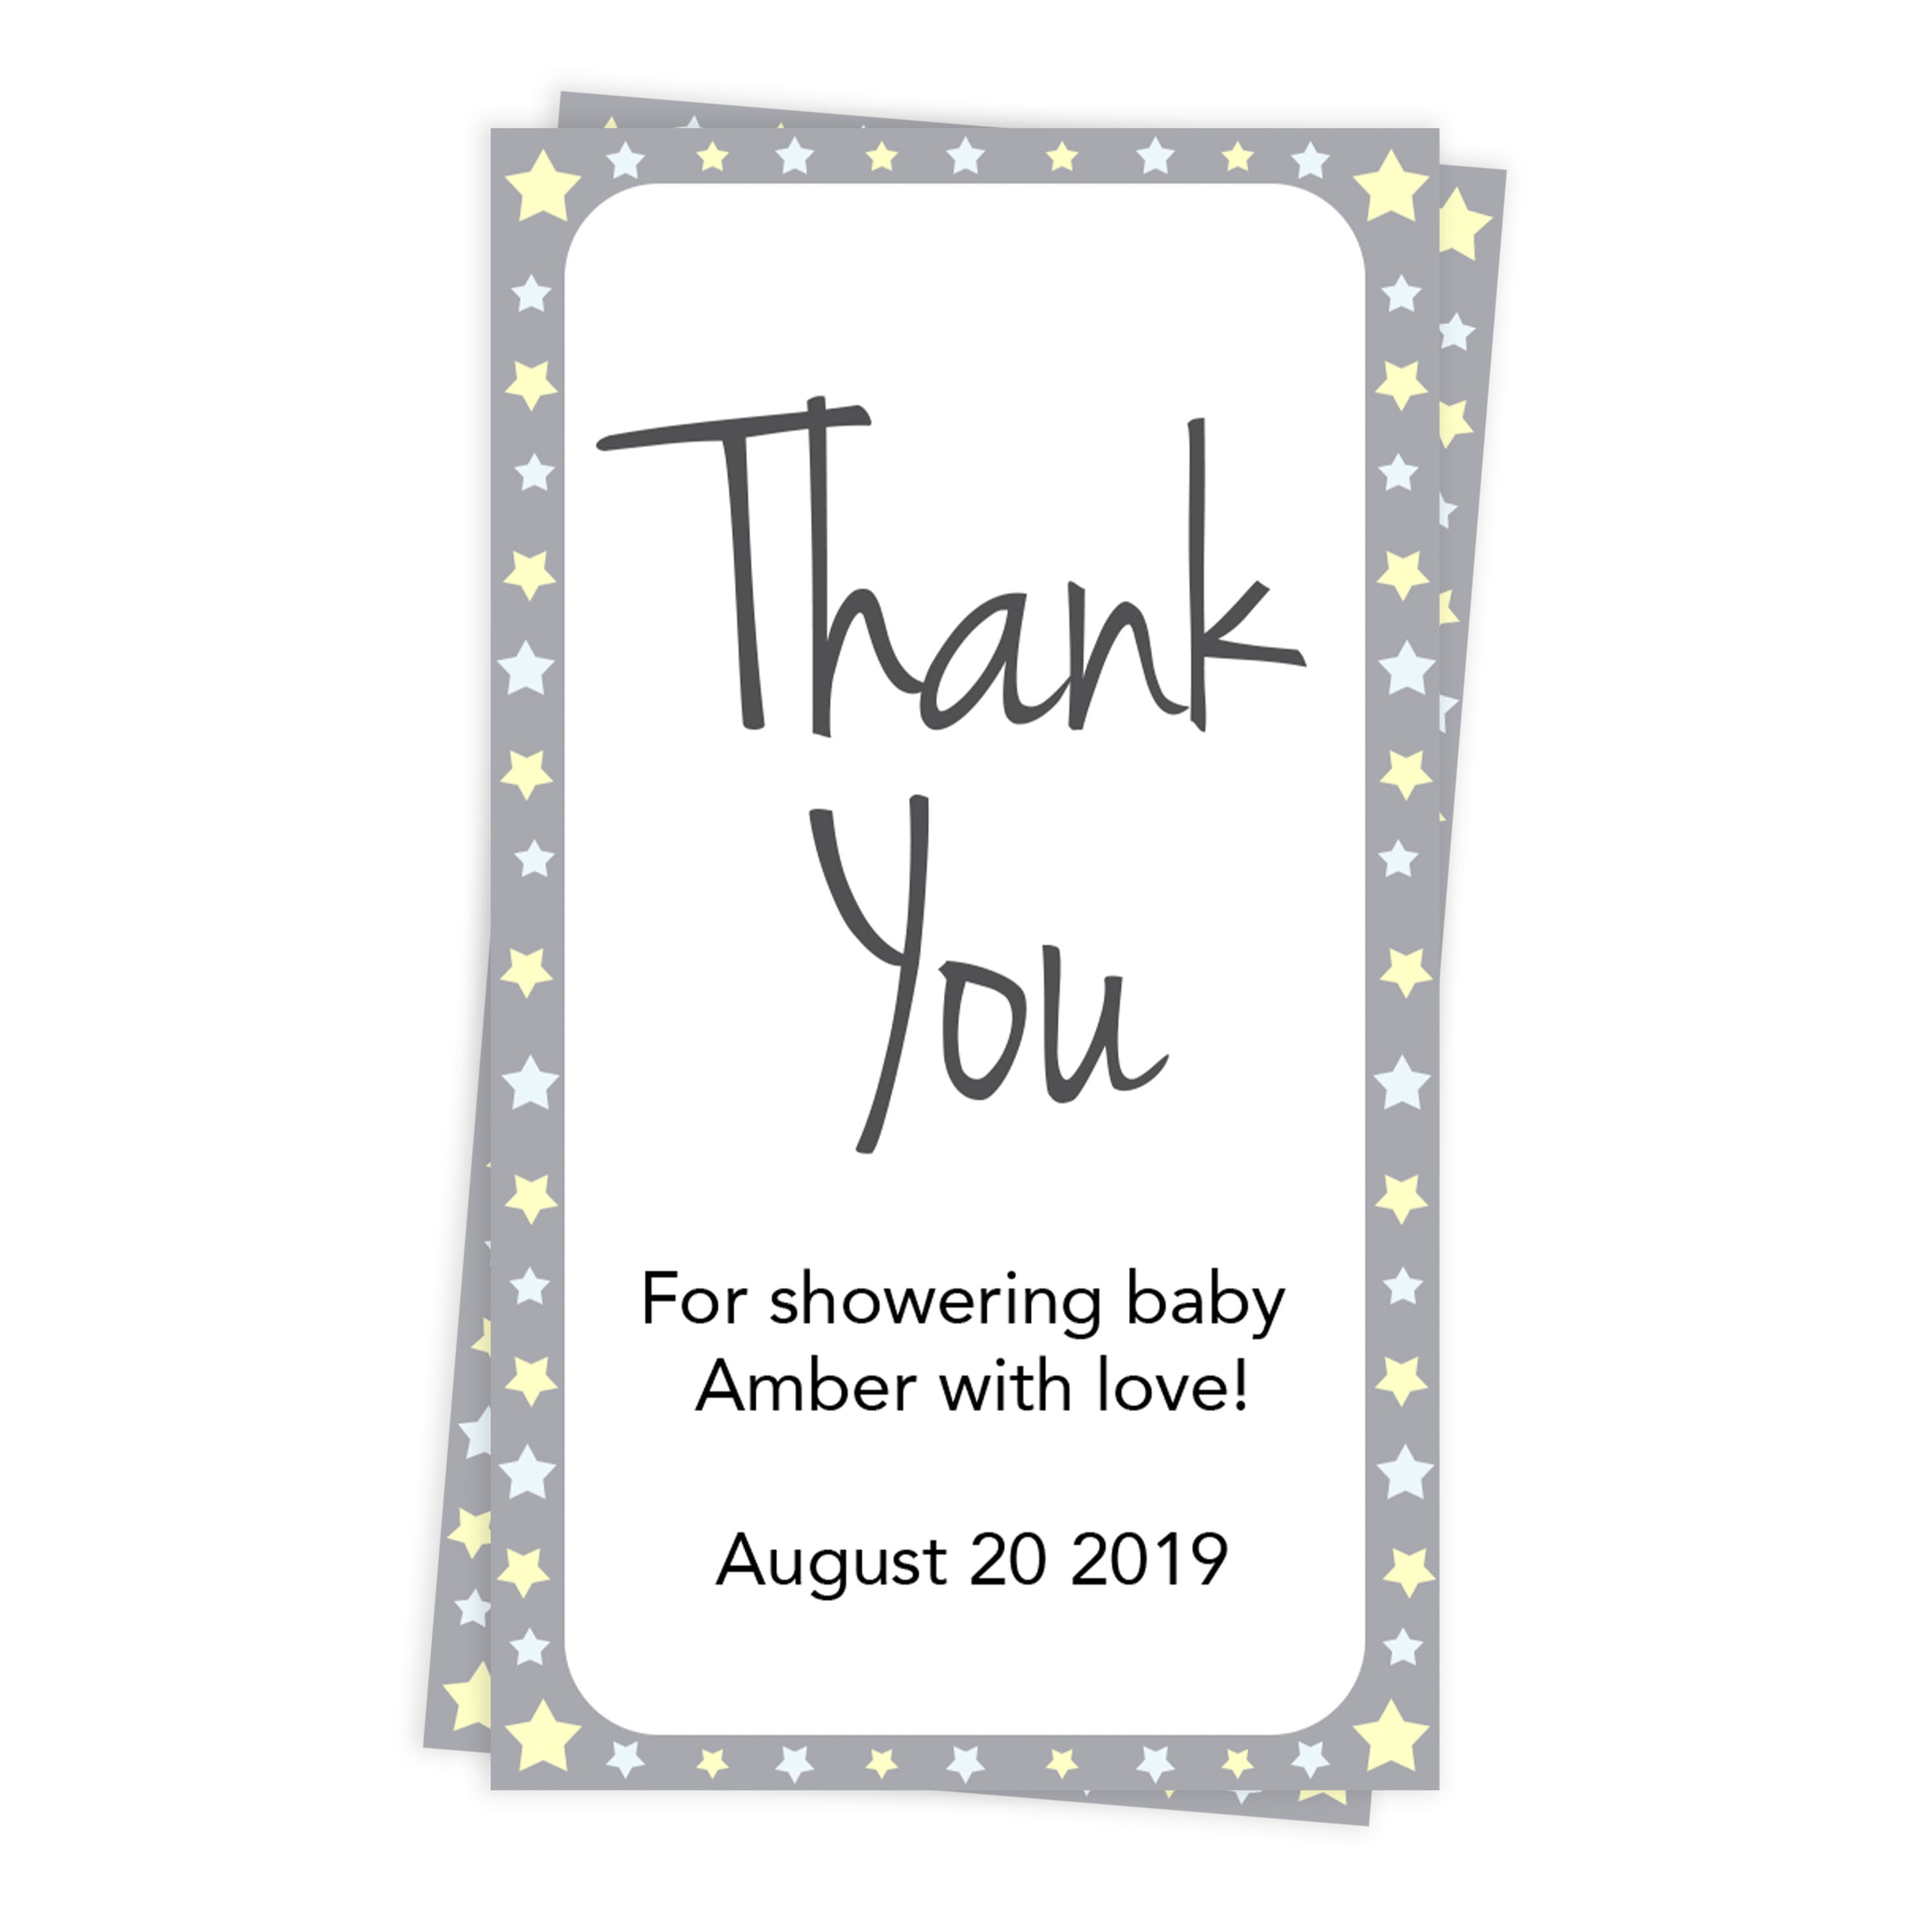 thank you baby tags, printable baby thank you tags, editable thank you tags, little star baby tags, stars baby shower decor, stars baby tags